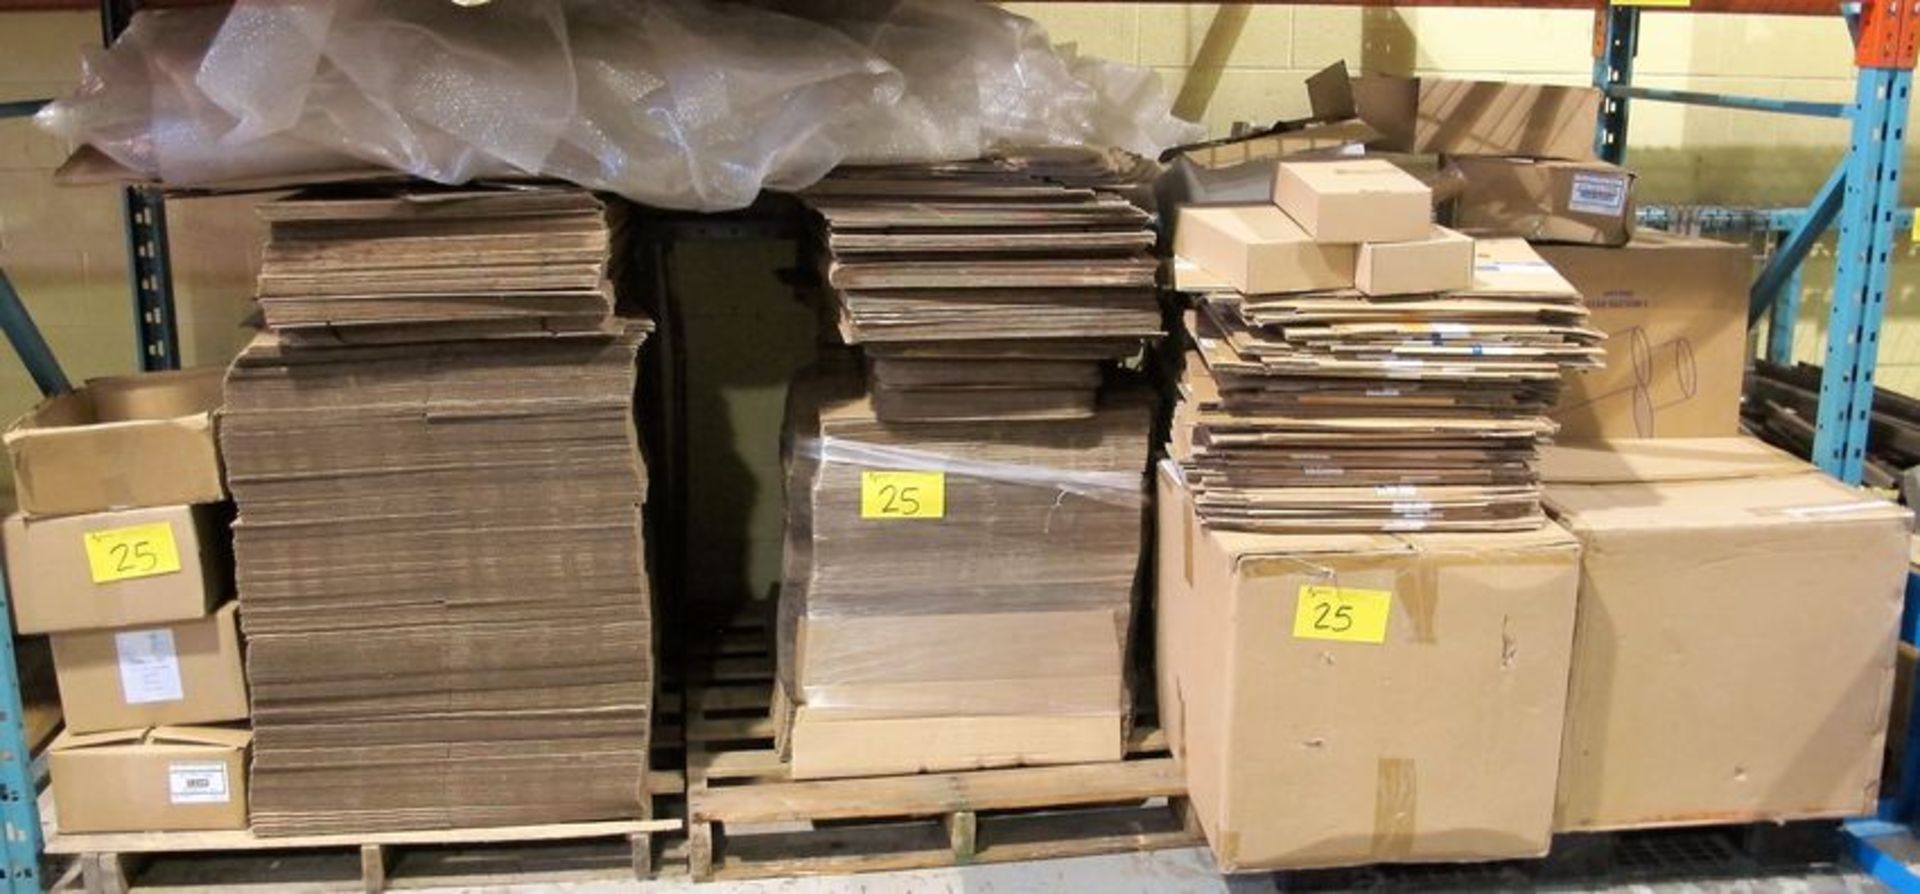 LOT OF (3) PALLETS OF ASST. CARDBOARD BOXES, INSERTS, BUBBLE WRAP, ETC.